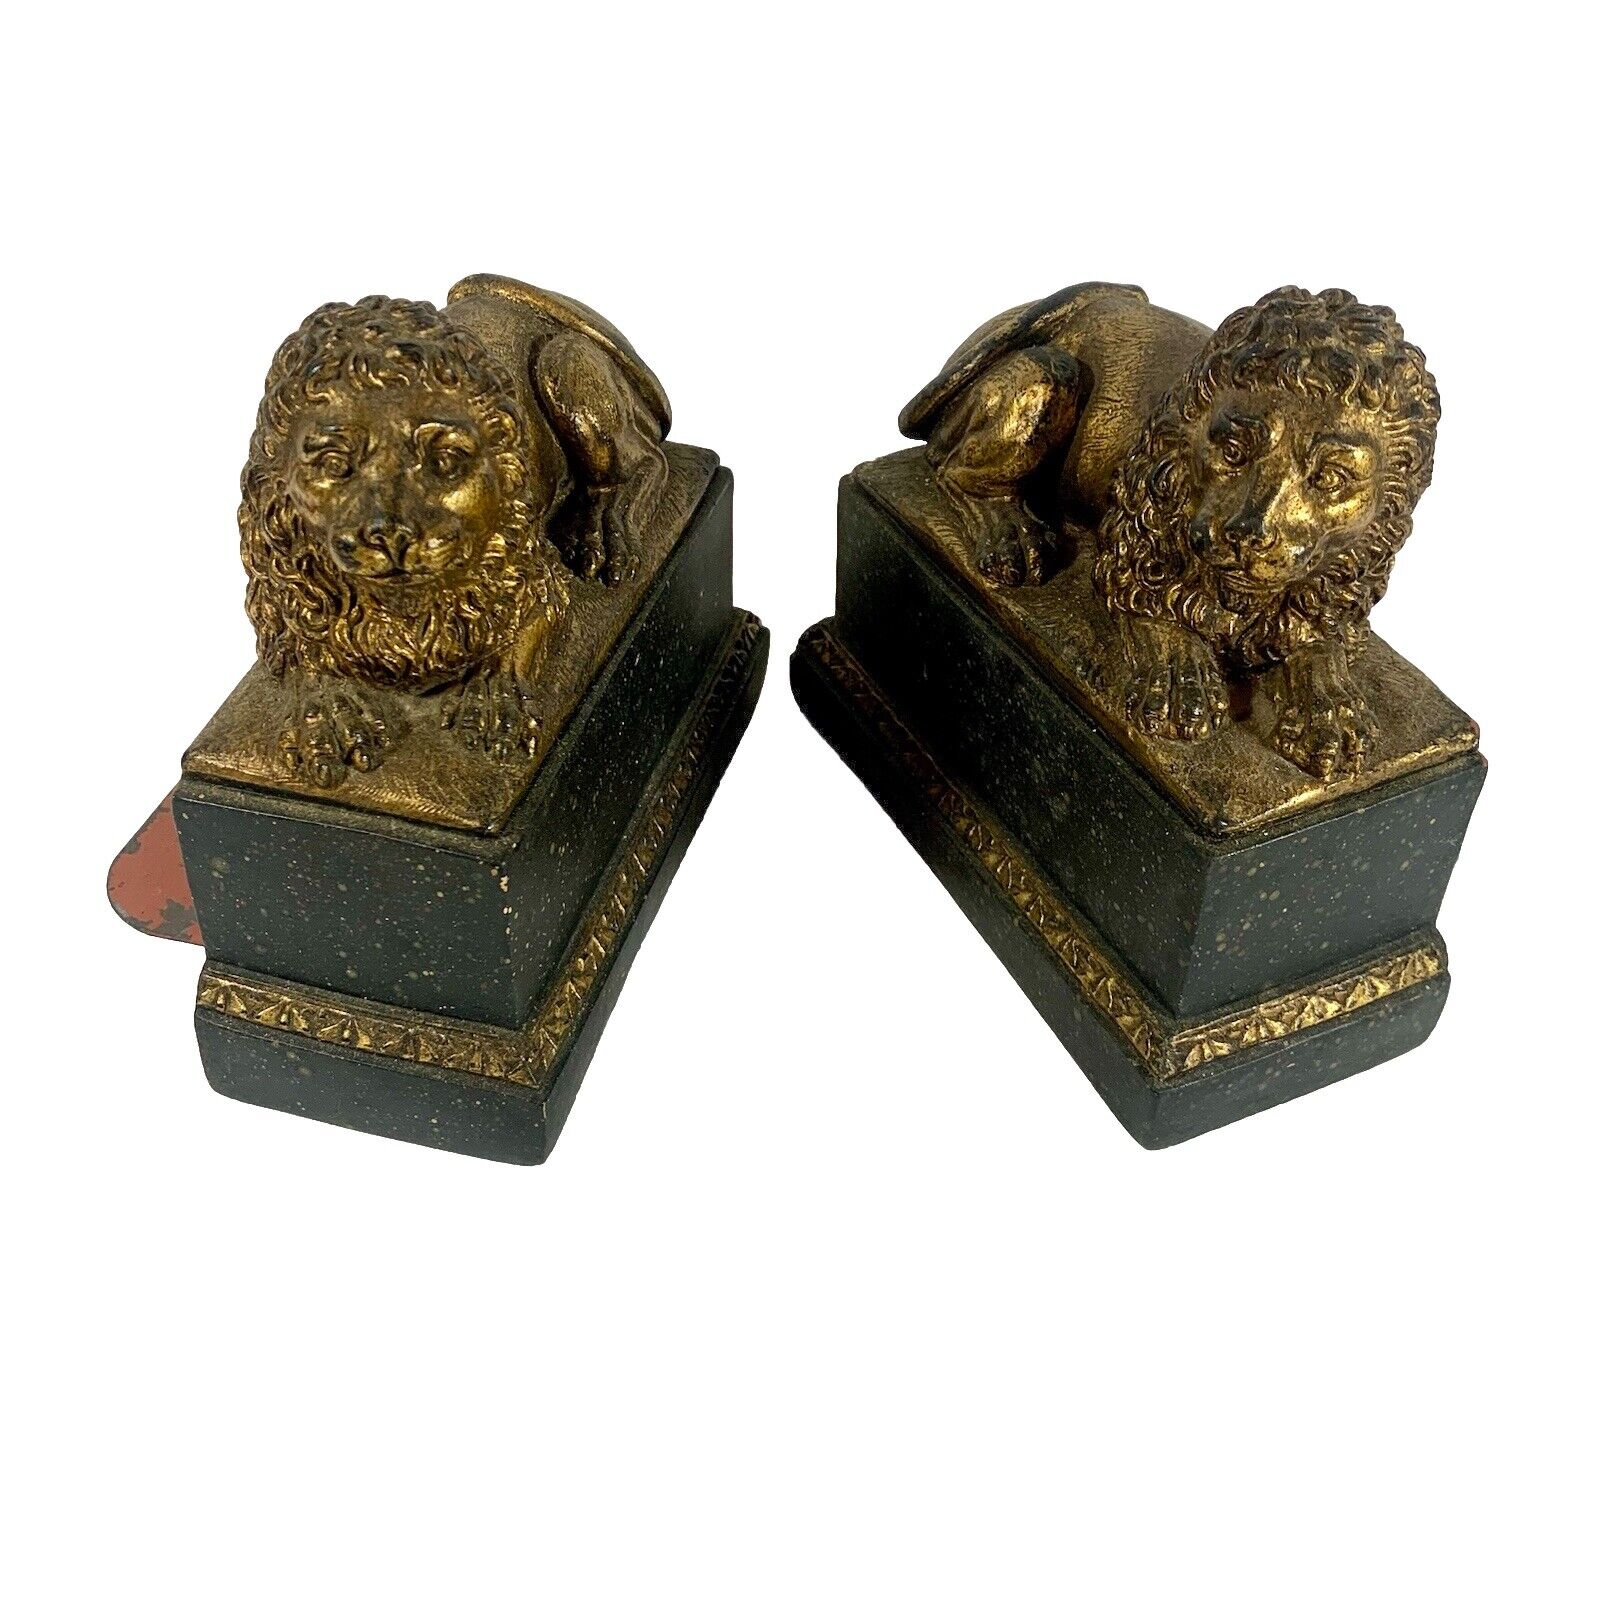 Set Of 2 VTG BORGHESE Bookends Golden Lions On Black Base 7x7x3” Italy READ